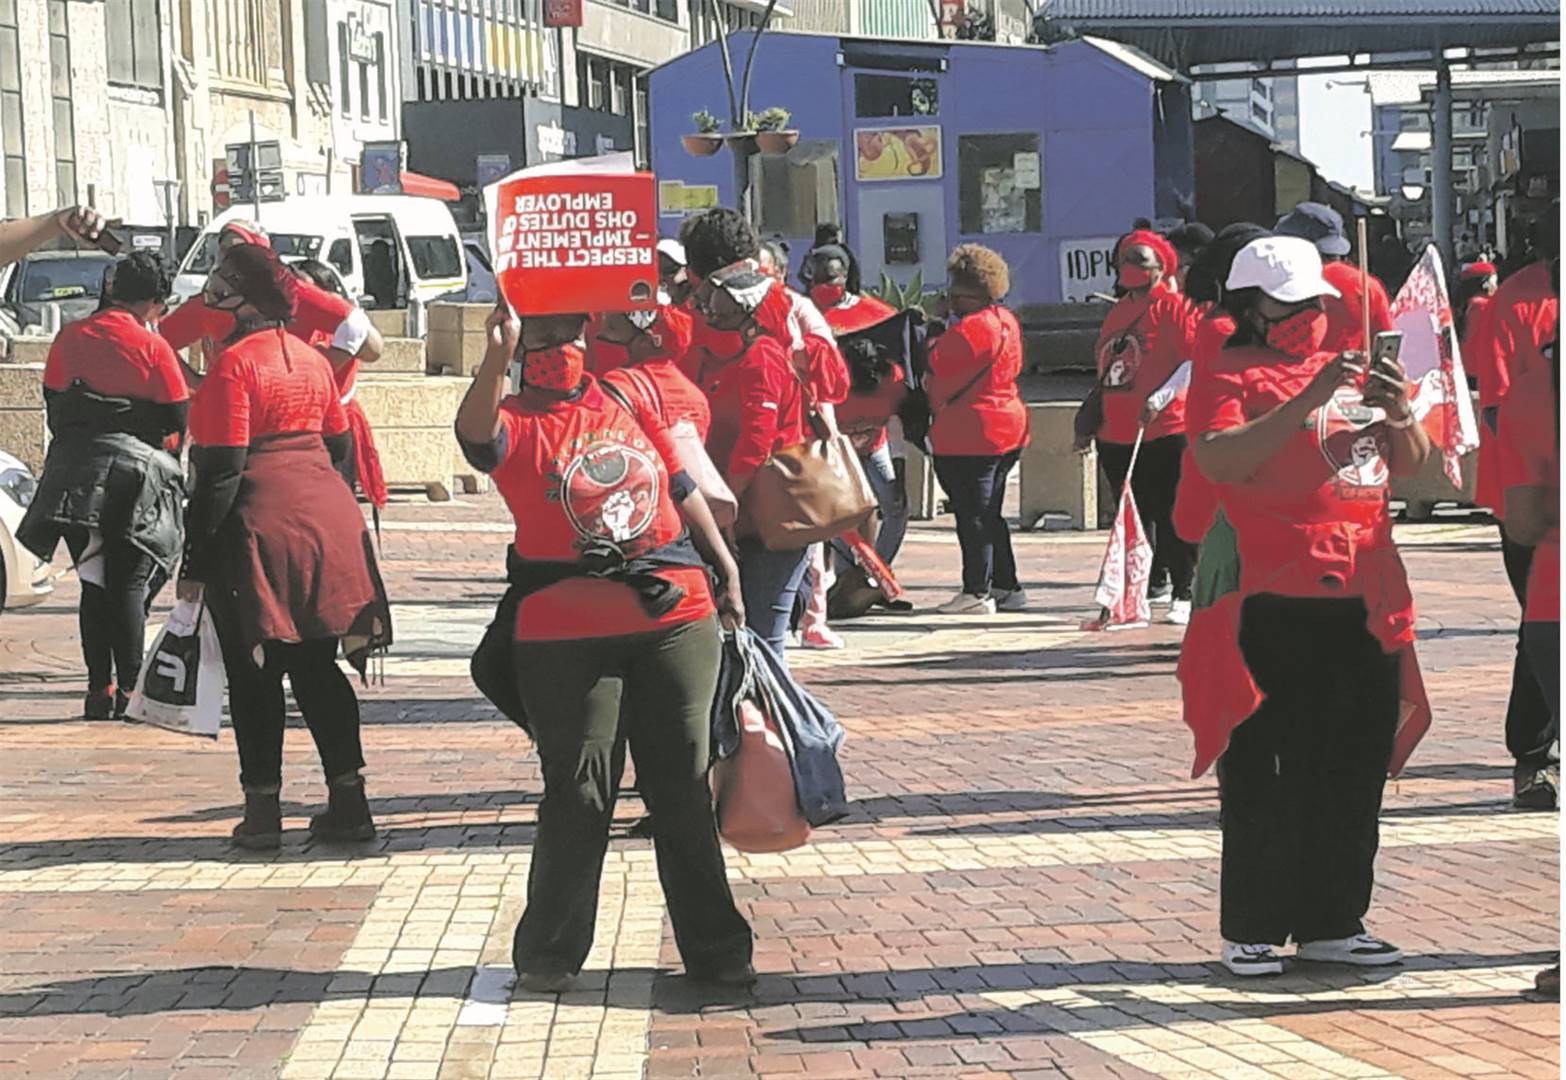 Union members gathered at Vuyisile Mini Square in Nelson Mandela Bay over salaries and lack of PPE.  Photo by Luvuyo Mehlwana